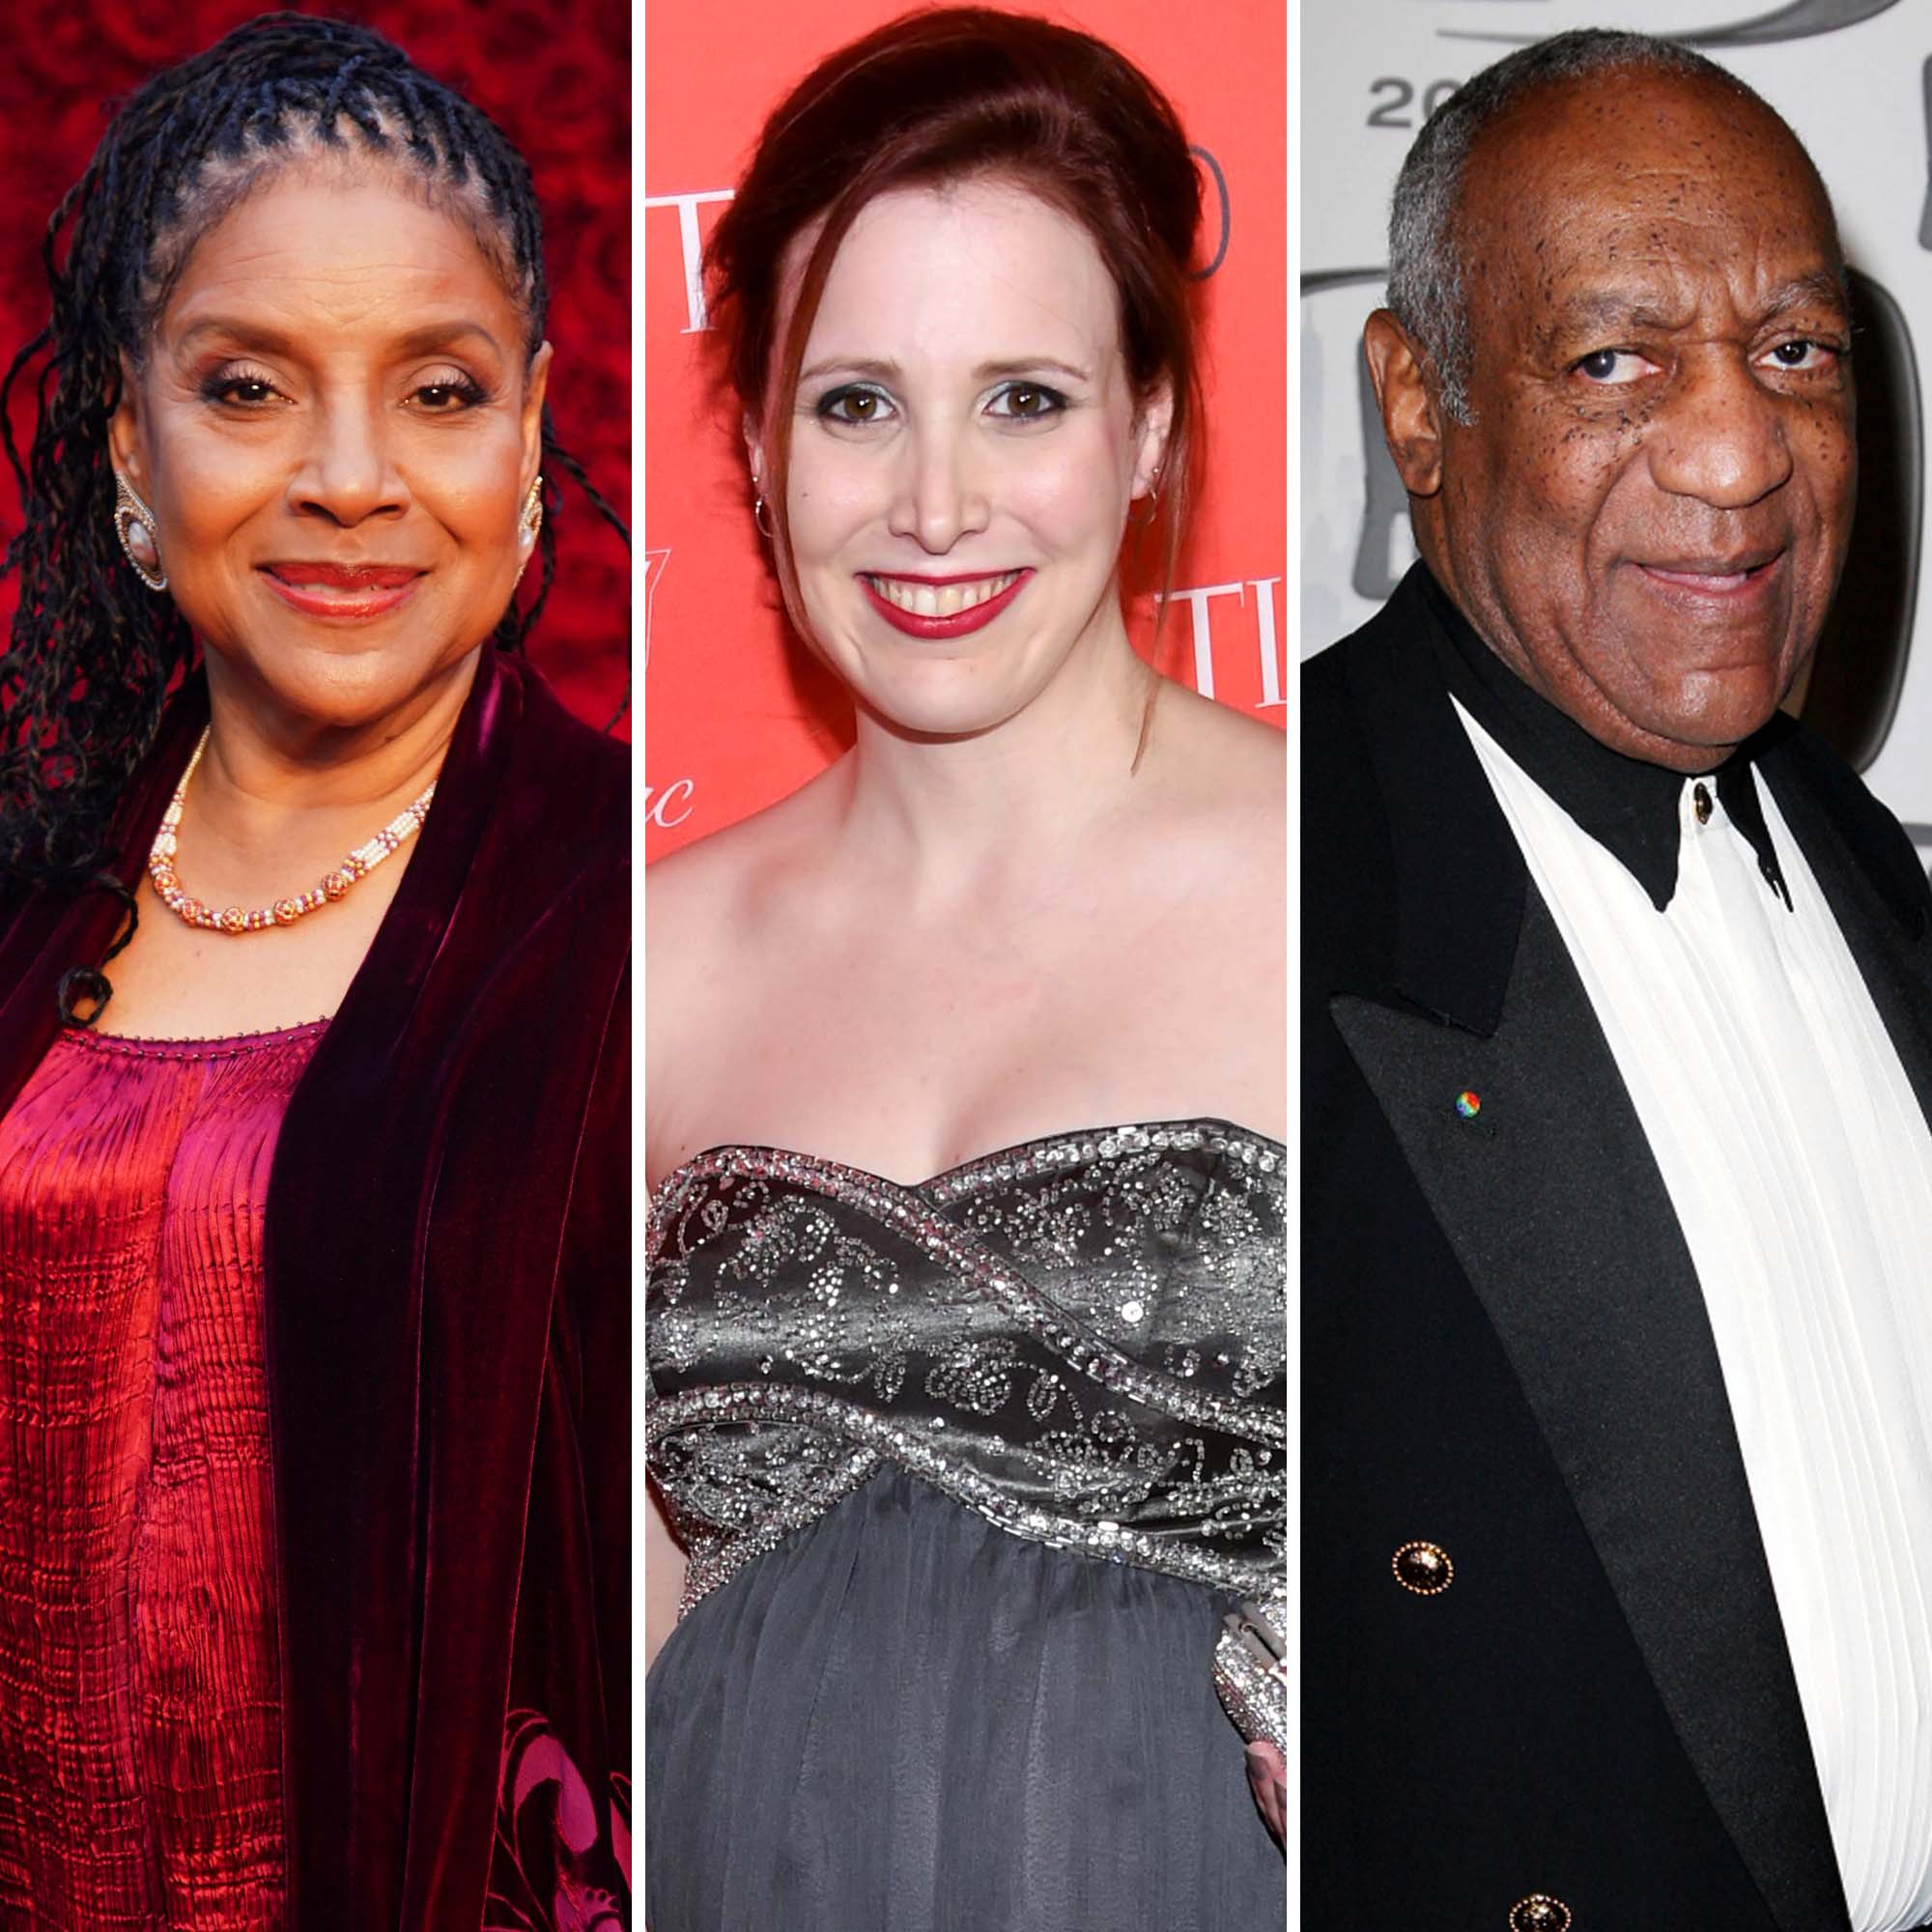 Bill Cosby Daughter Porn - Phylicia Rashad Raises Eyebrows With Response to Bill Cosby's Release